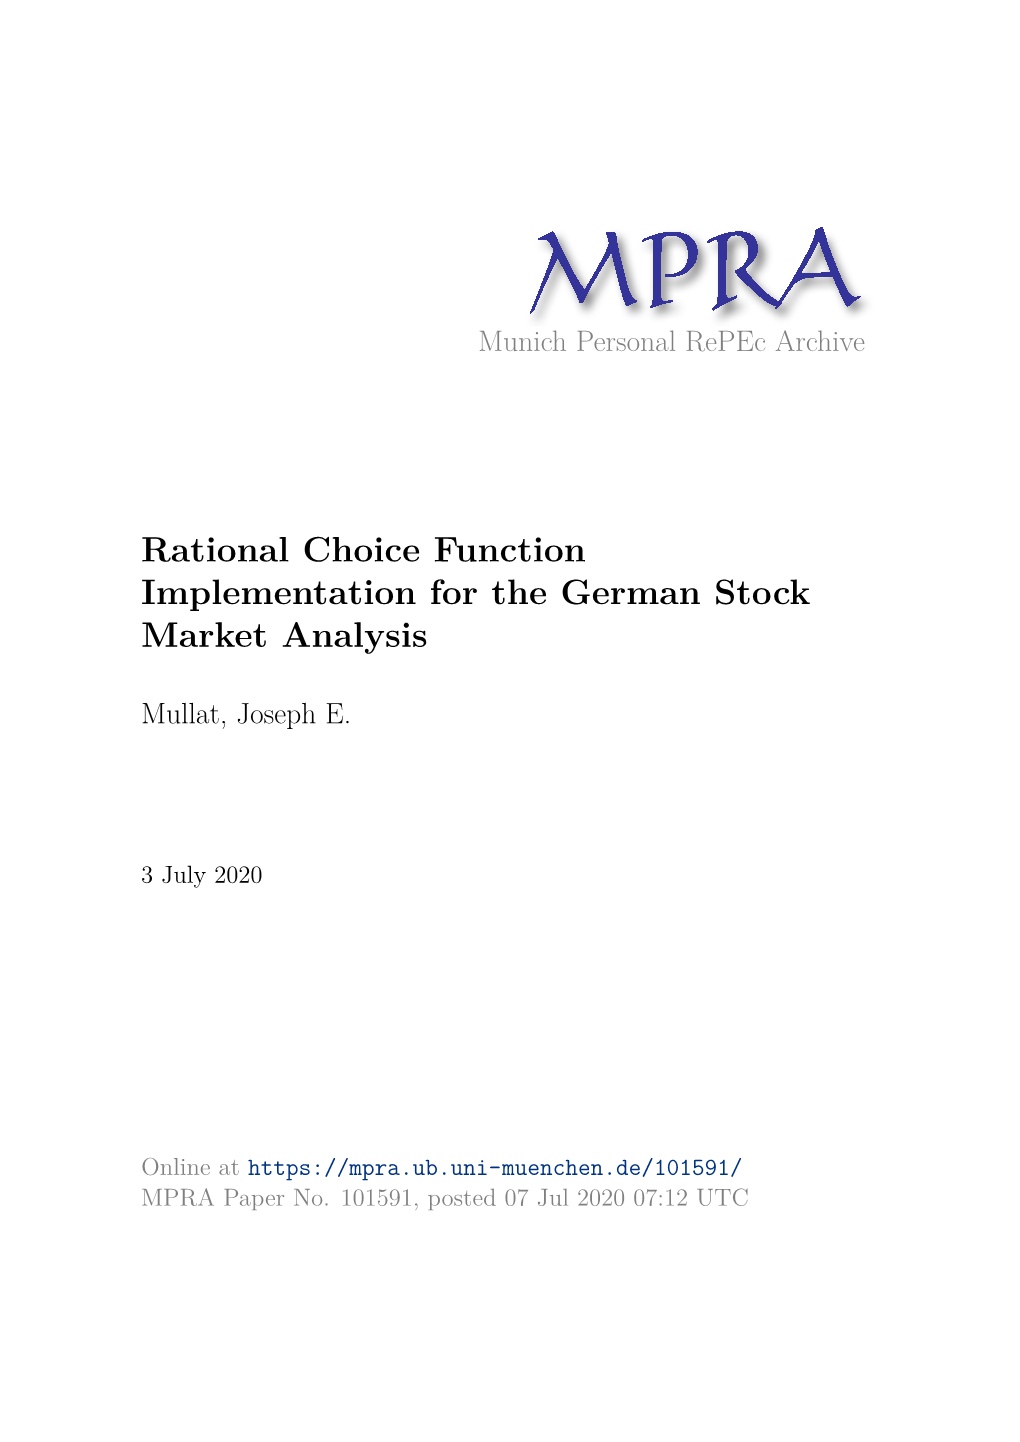 Rational Choice Function Implementation for the German Stock Market Analysis